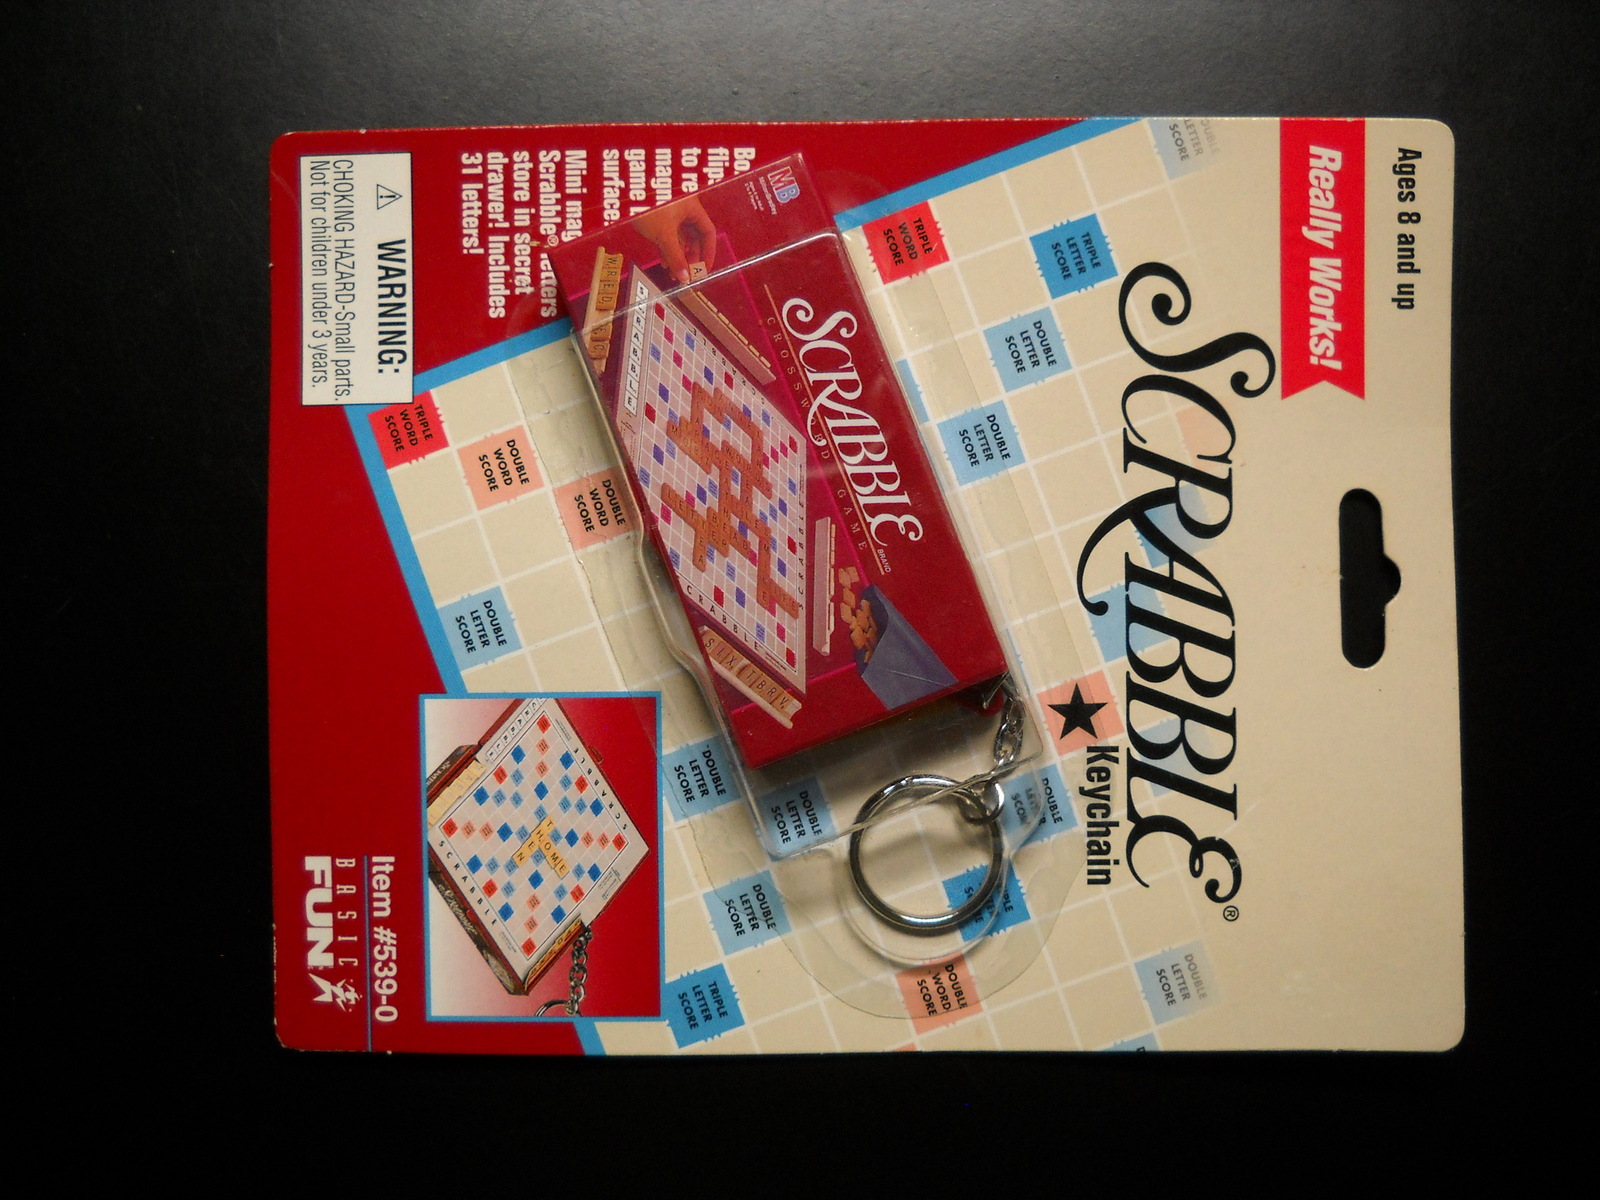 Basic Fun Key Chain Scrabble Miniature Boxed Game as Fob Sealed on Card - $10.99